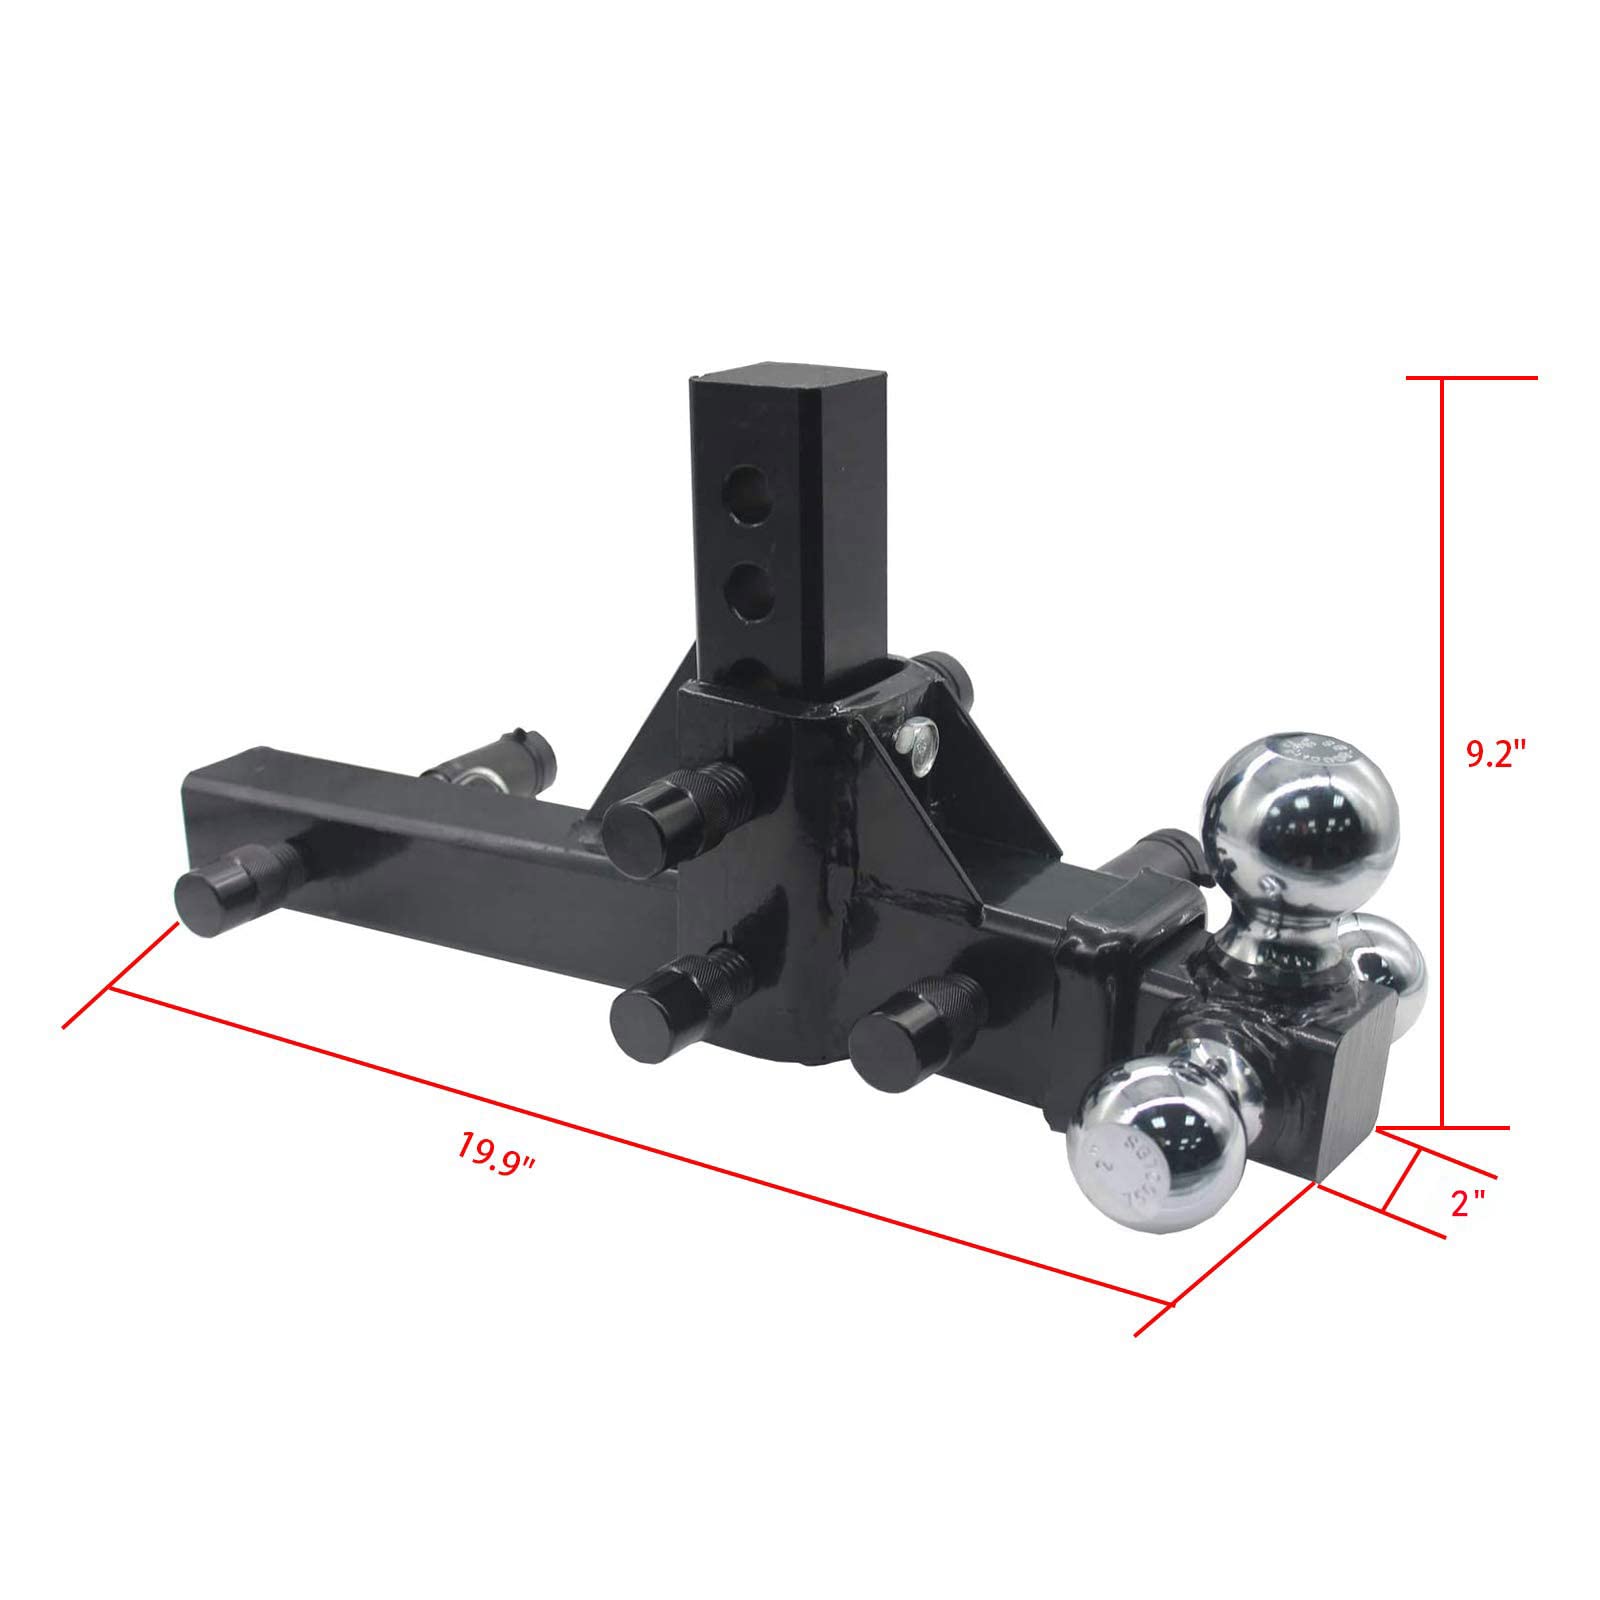 AC-DK Adjustable Trailer Hitch Ball Mount, Fits 2-Inch Receiver, 5-3/4-Inch Drop, 1-7/8, 2, 2-5/16-Inch Balls, 10,000 lbs, Come with 4-Pack 5/8" Tow Hitch Pin Locks Keys